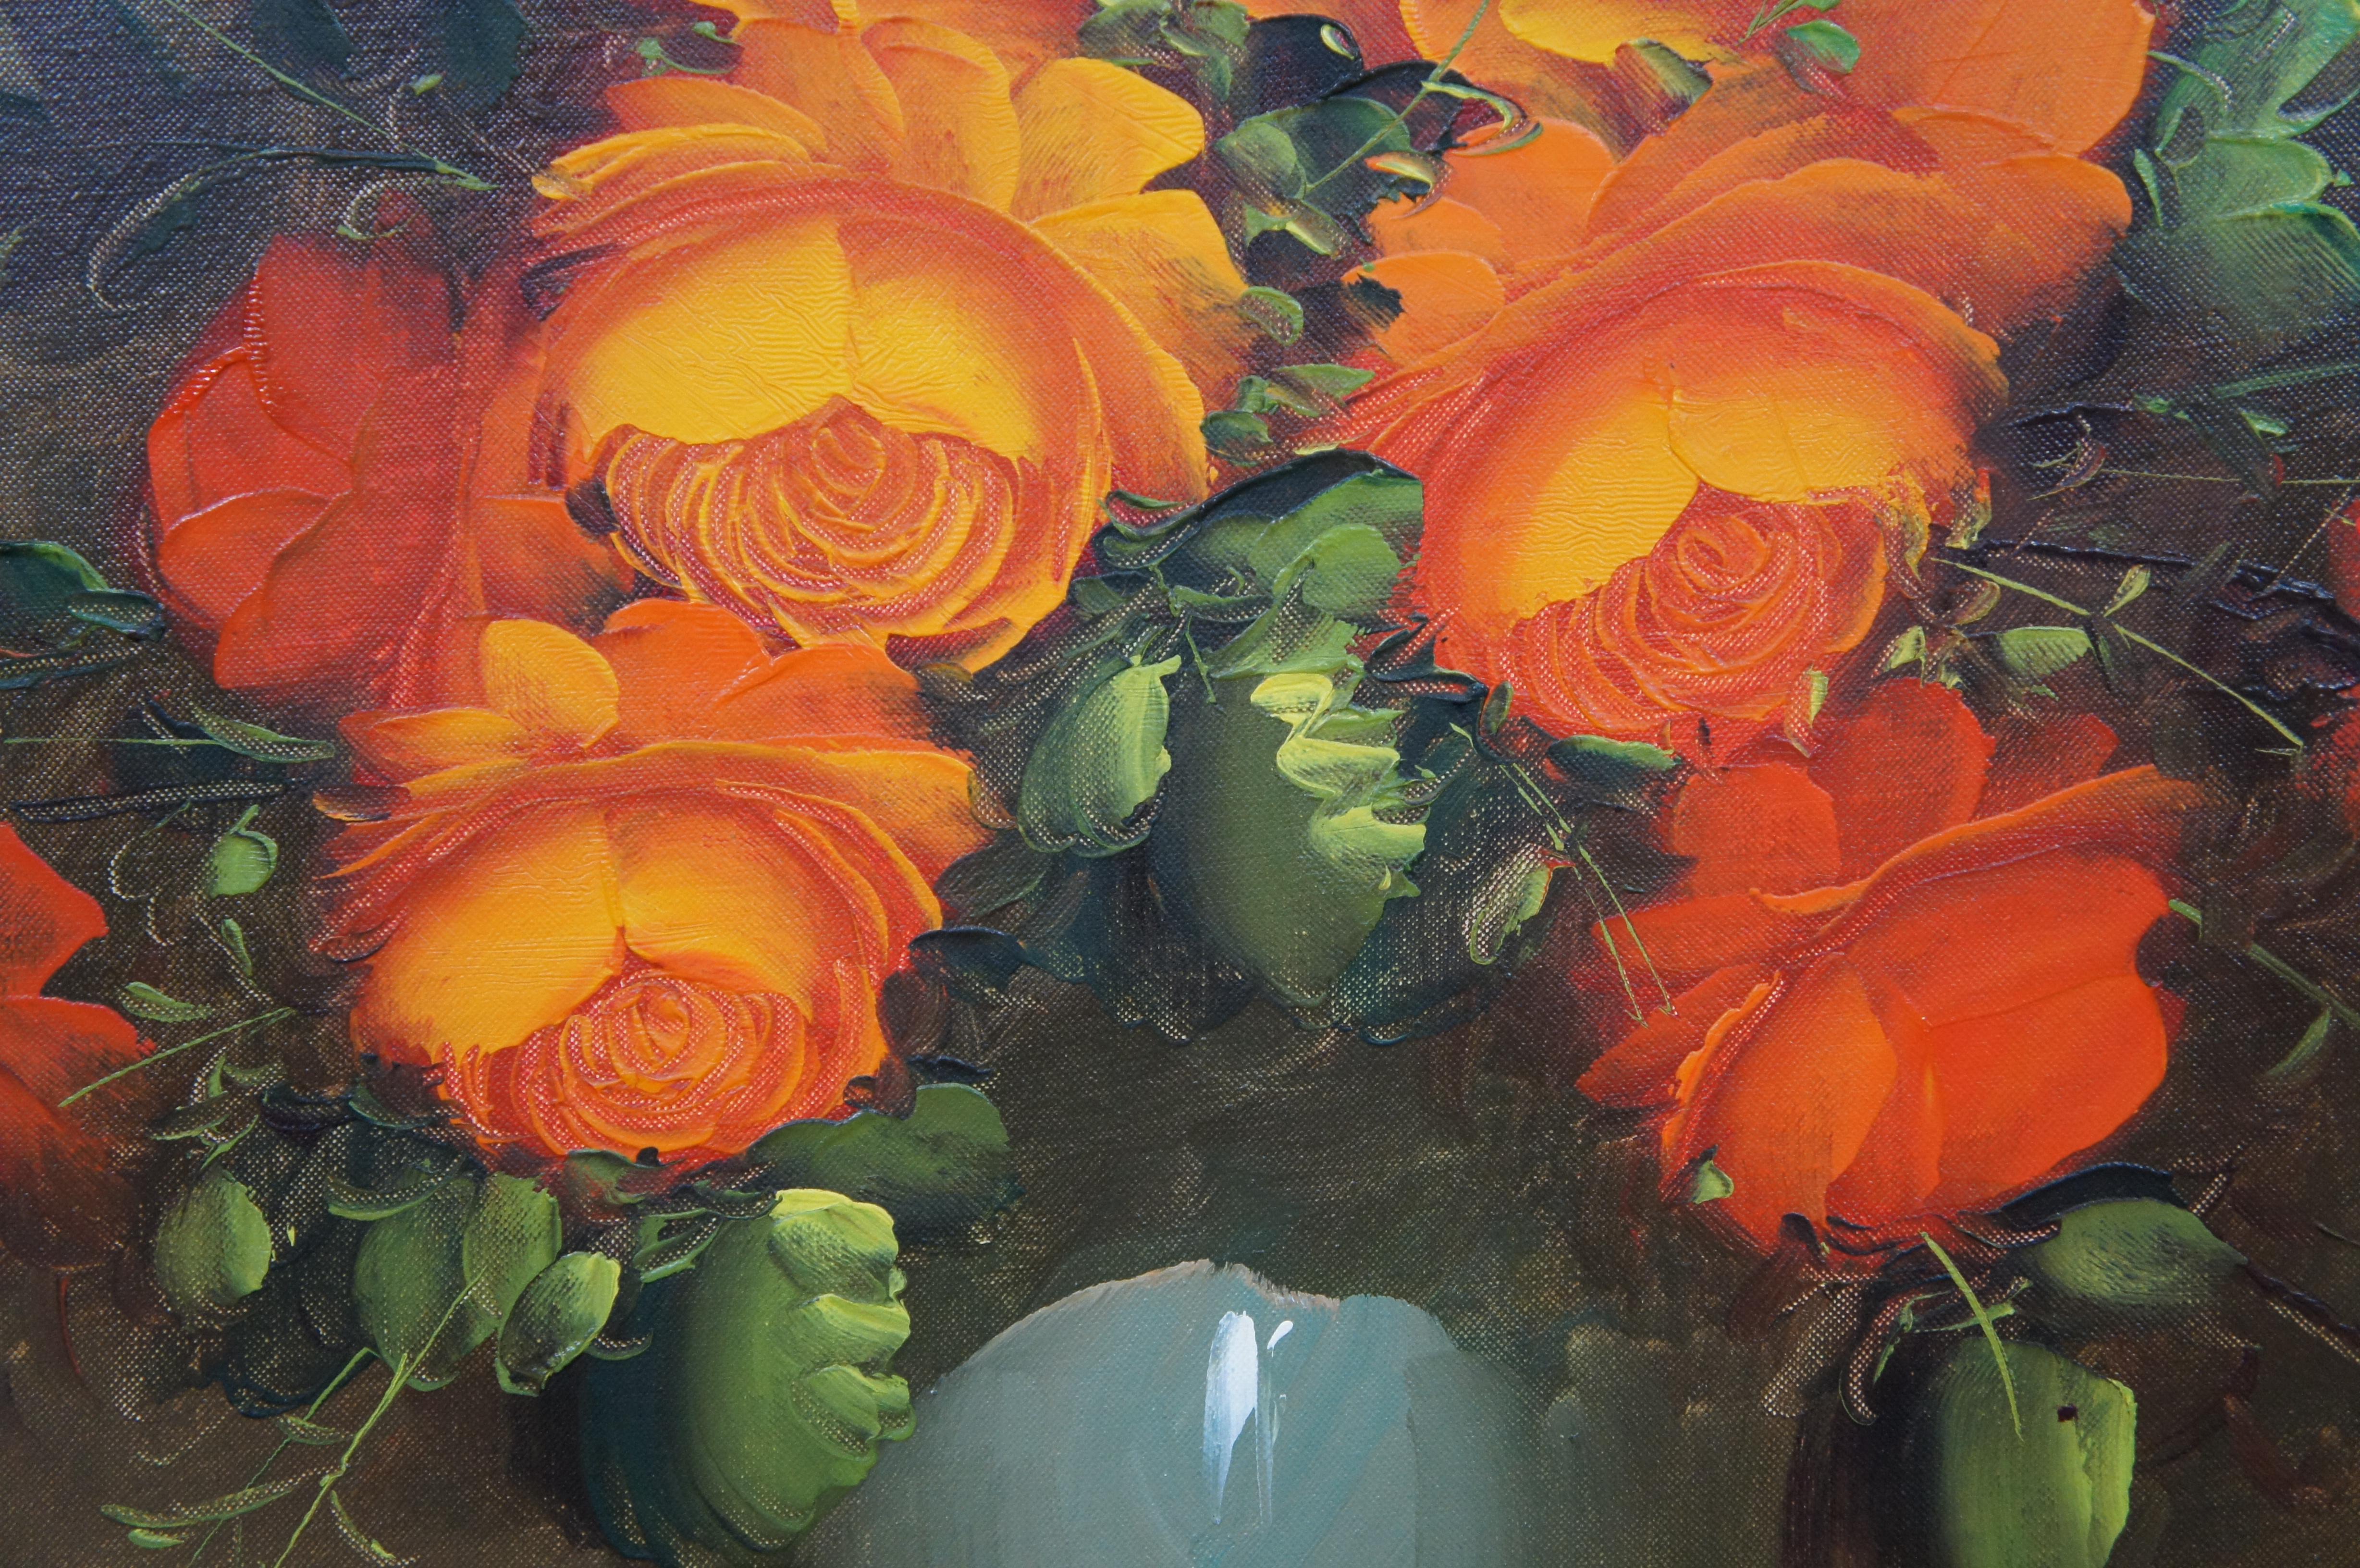 20th Century Vintage Suzanne Floral Still Life Oil Painting on Canvas Orange Rose Bouquet For Sale